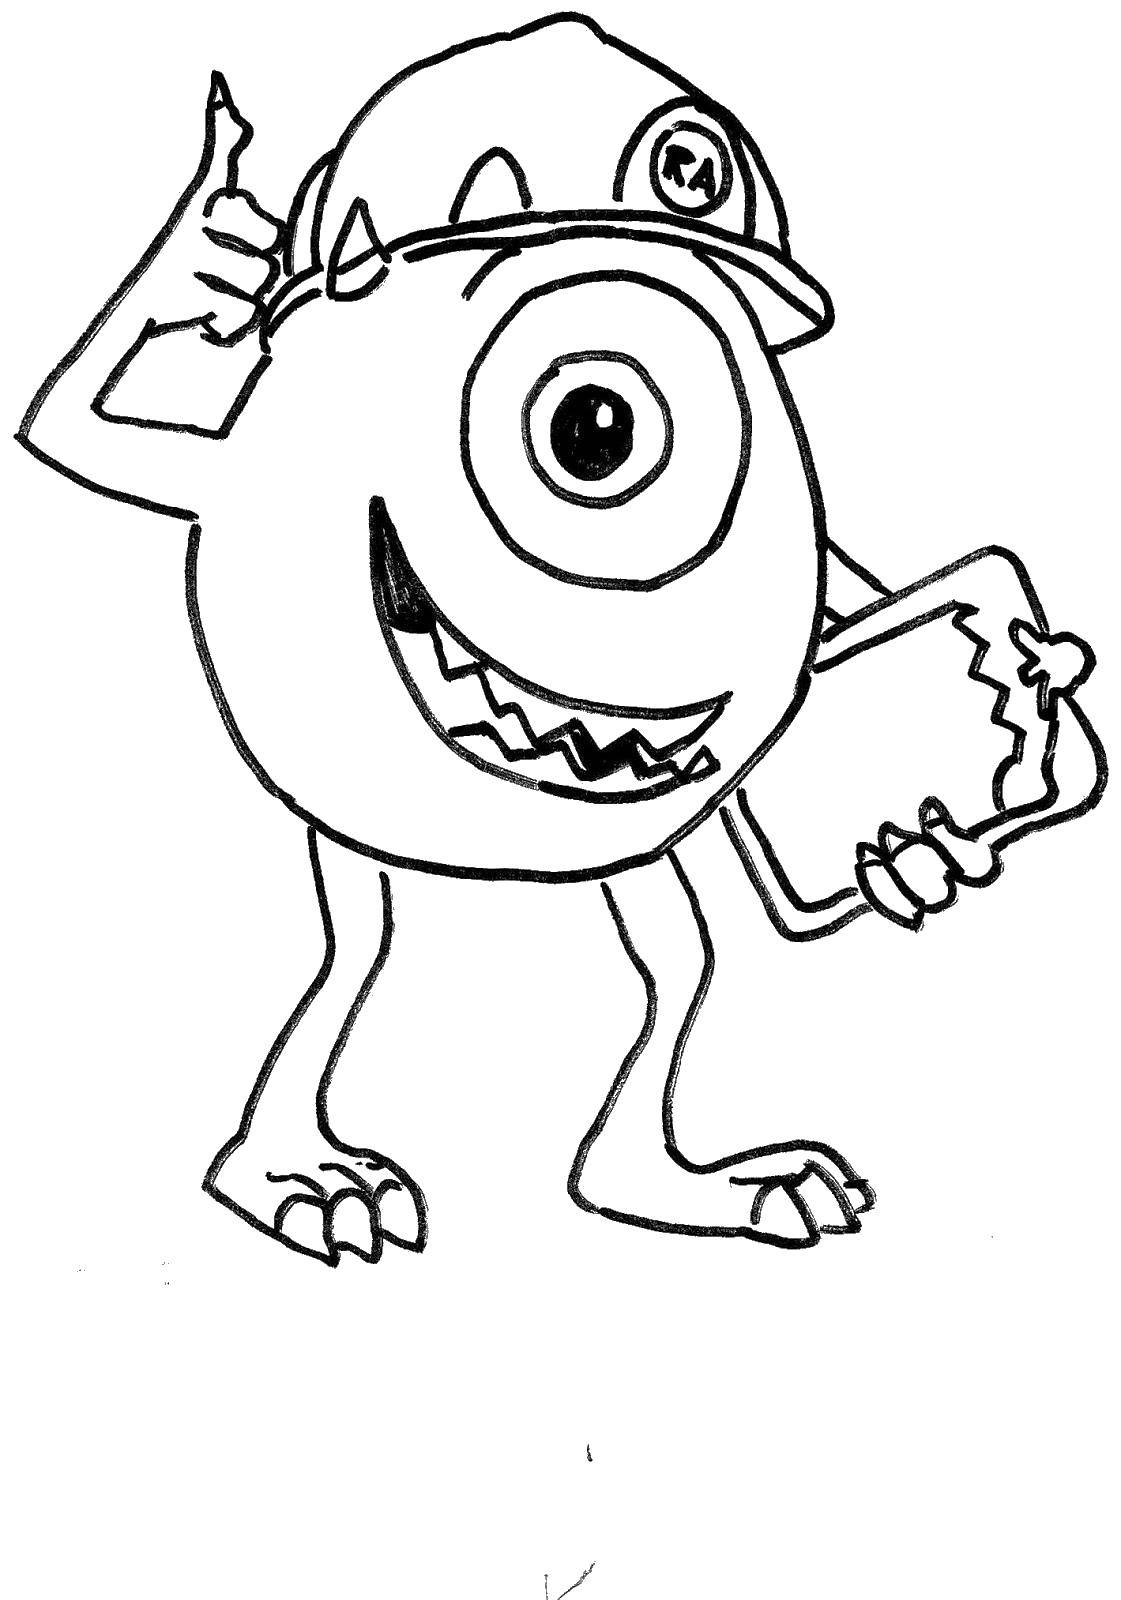 Coloring Mike wazowski documents. Category coloring monsters Inc. Tags:  Mike Wazowski, monsters Inc.